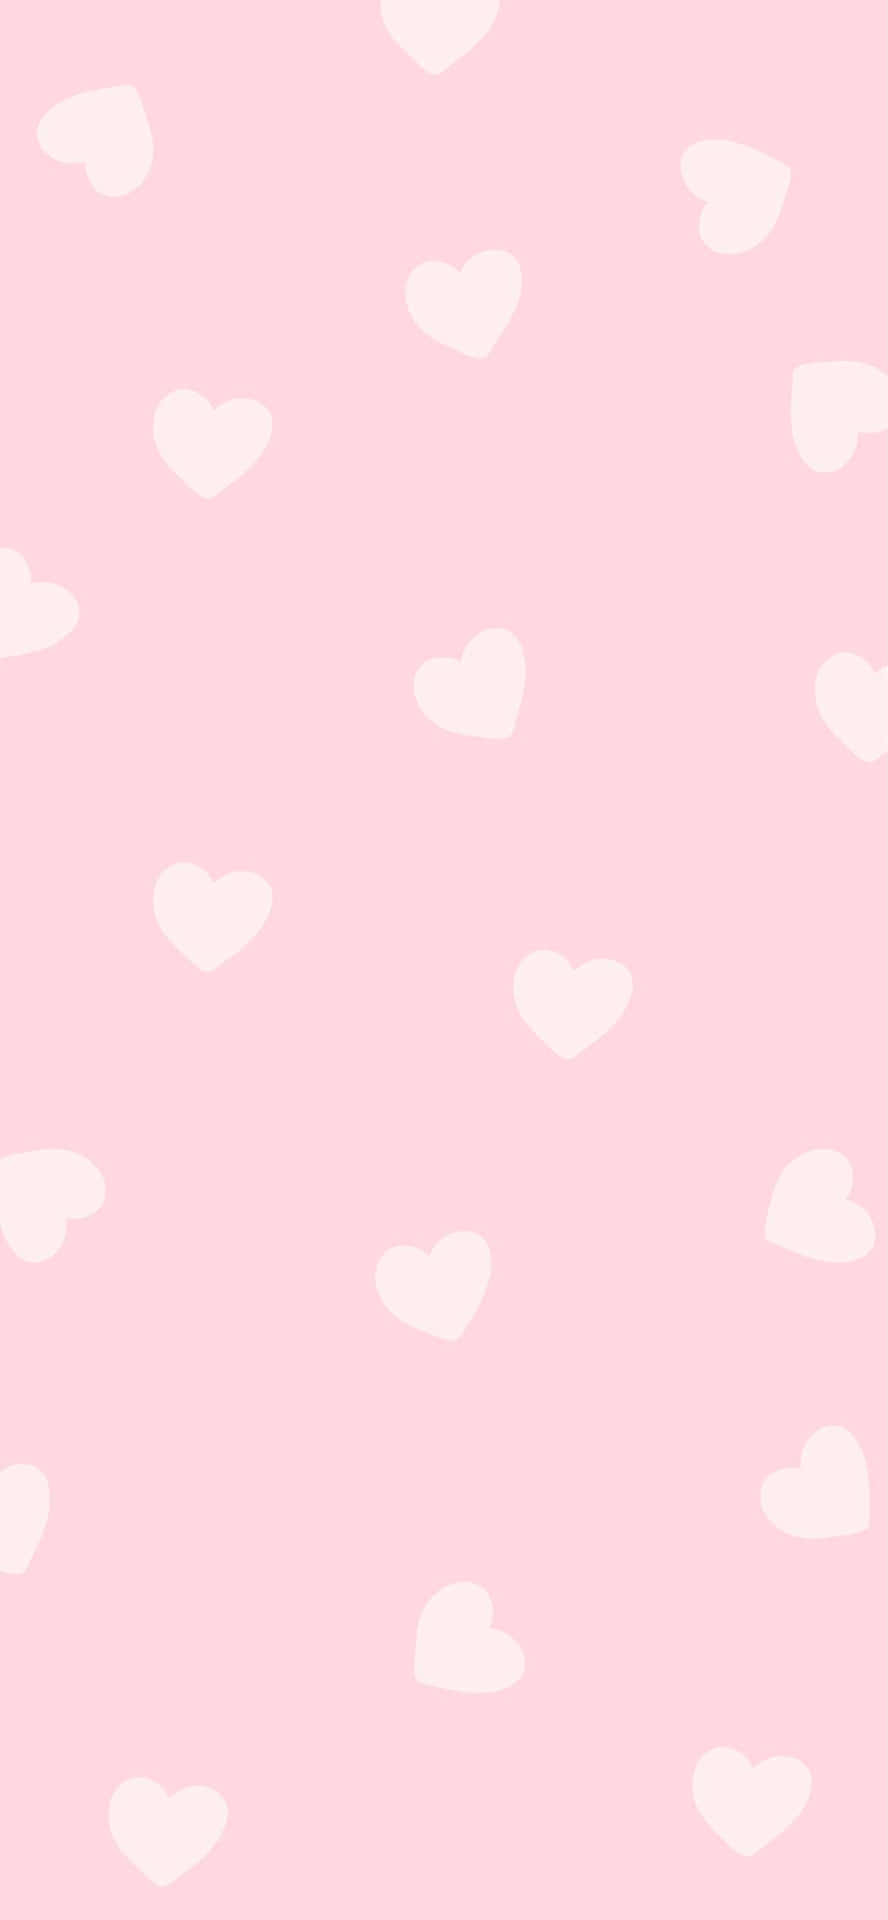 Cute pink background for all your girly needs!